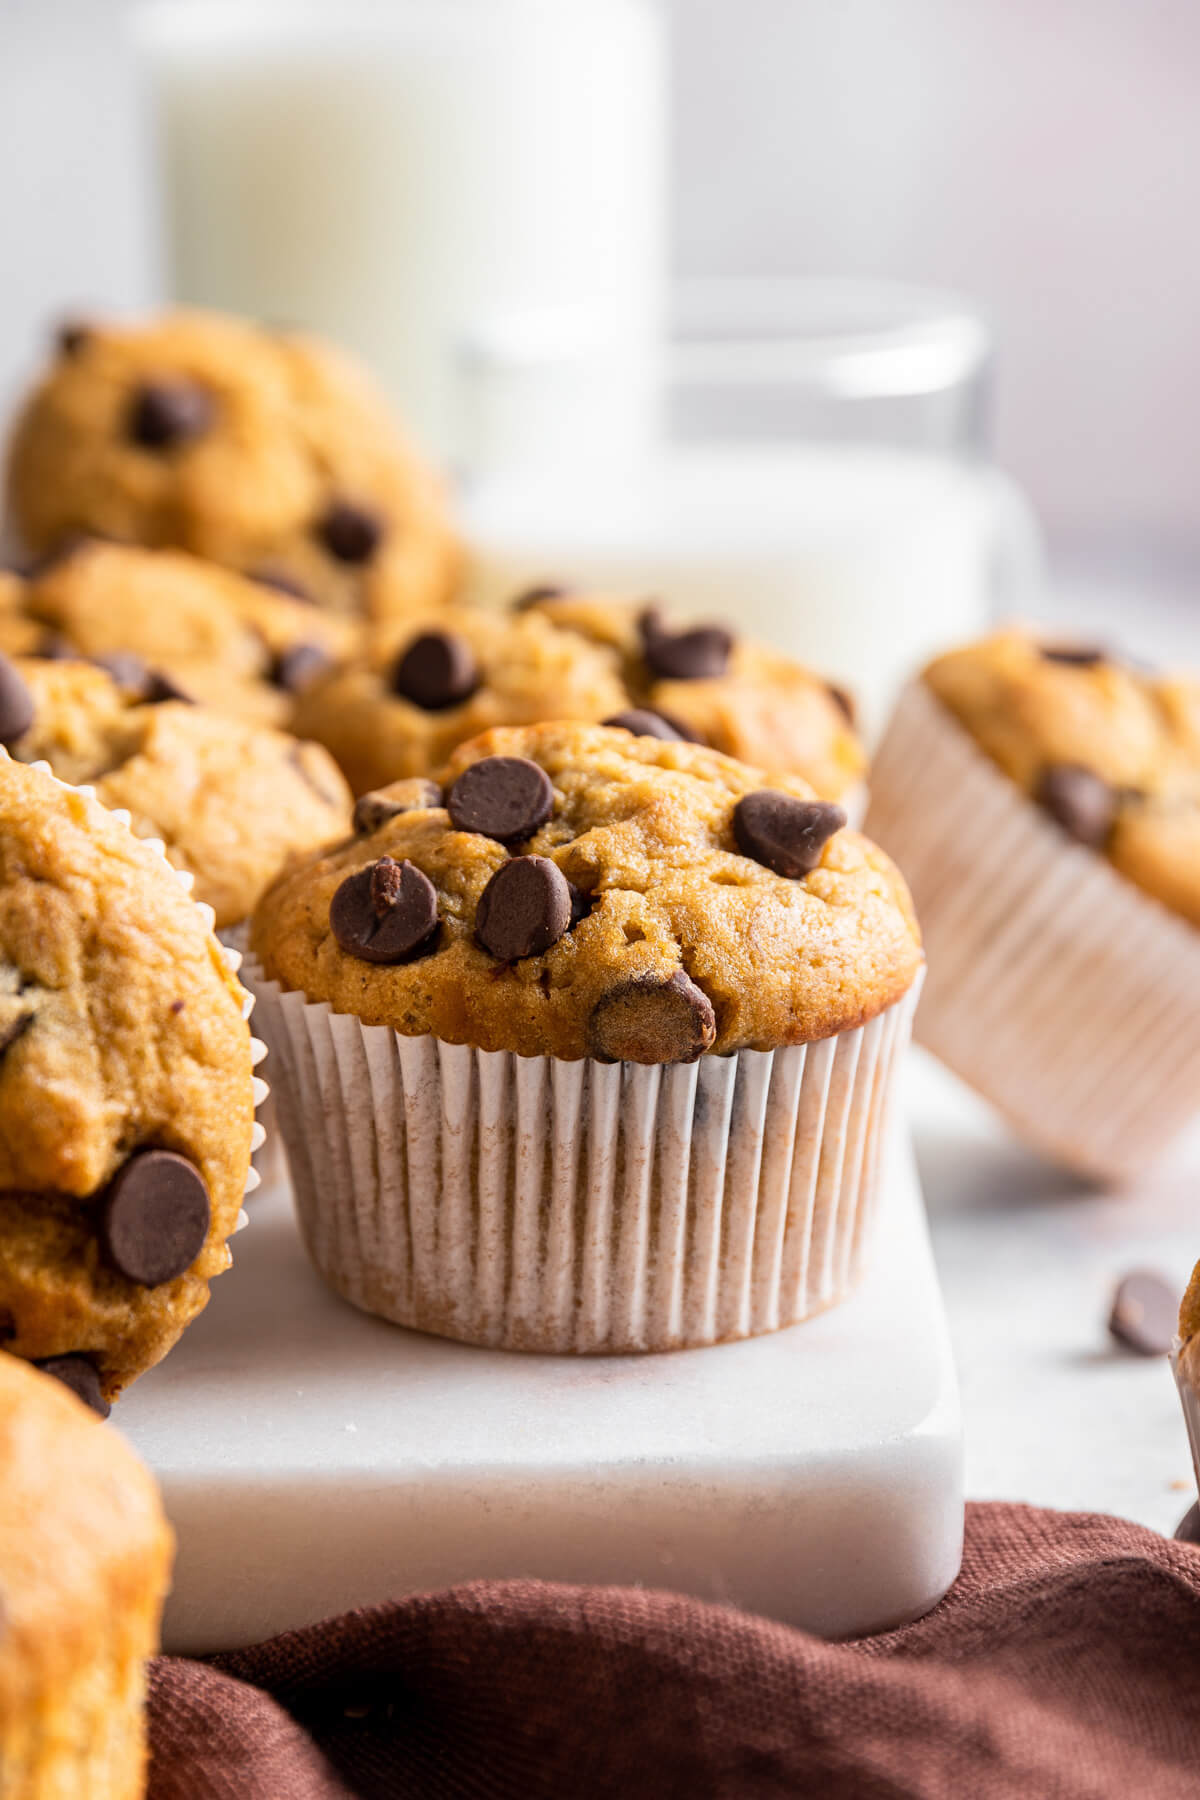 Golden baked Tahini Chocolate Chip Banana Muffins in white muffin papers.